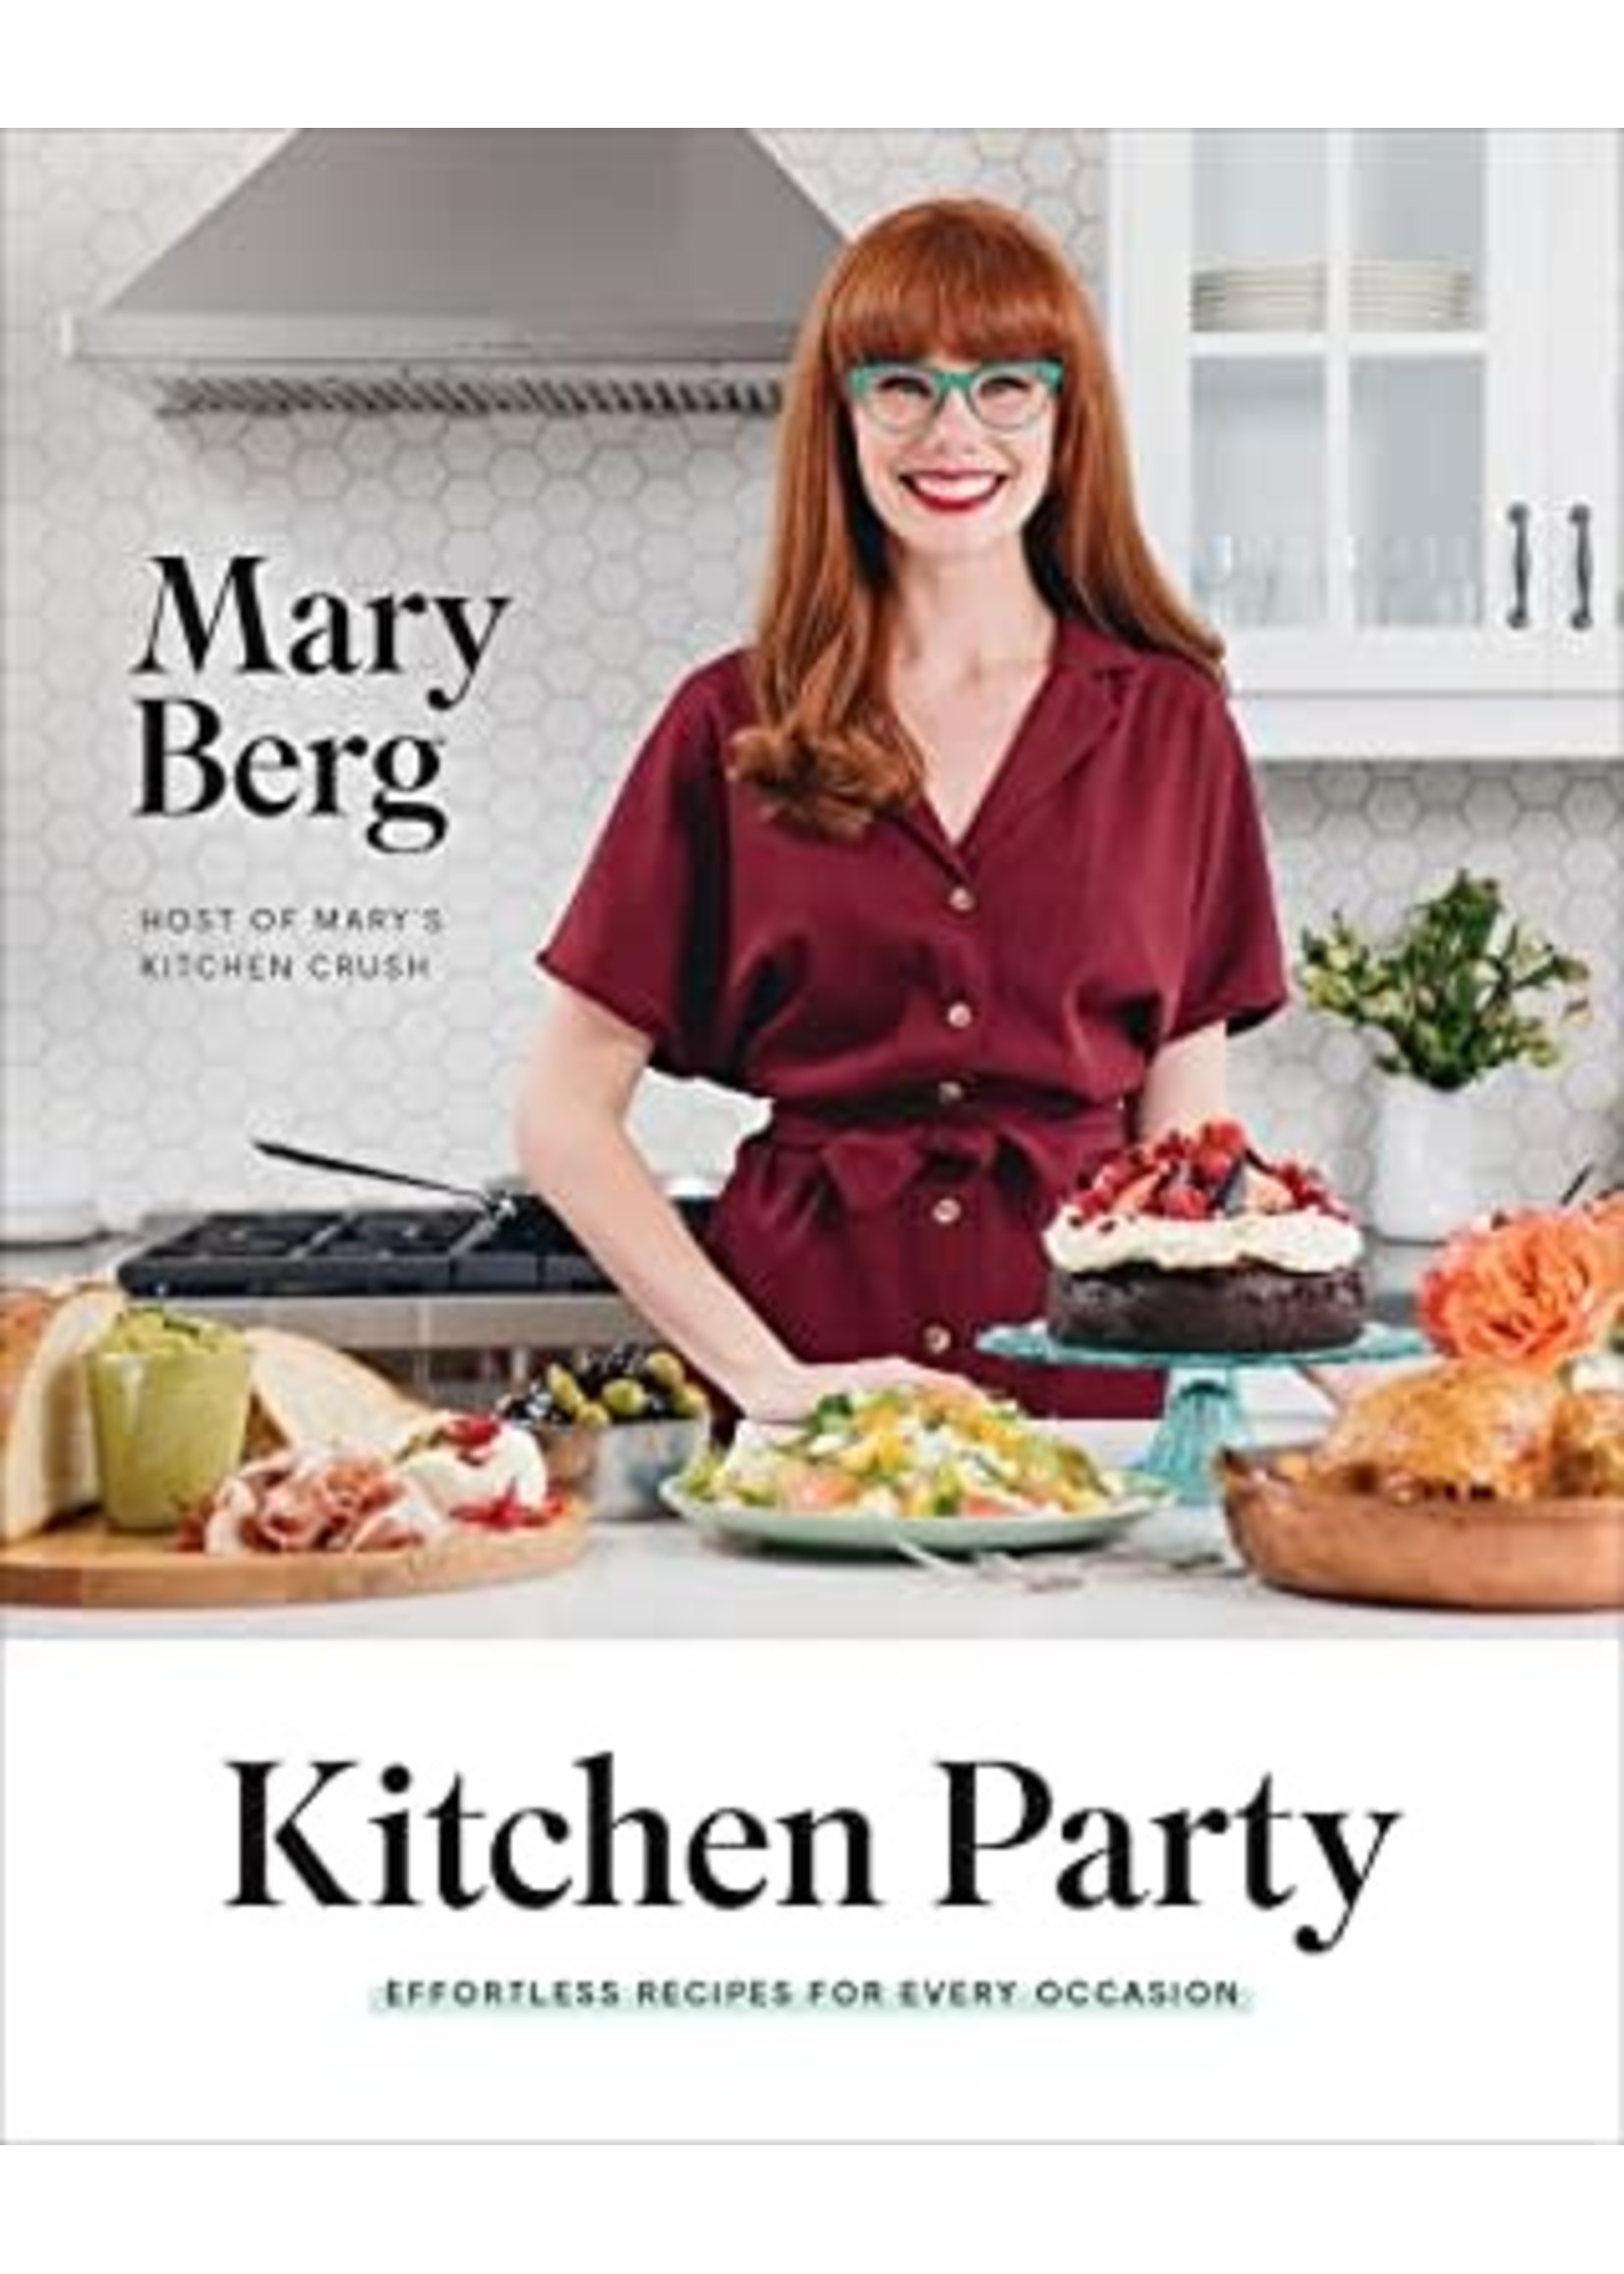 Kitchen Party: Effortless Recipes for Every Occasion by Mary Berg